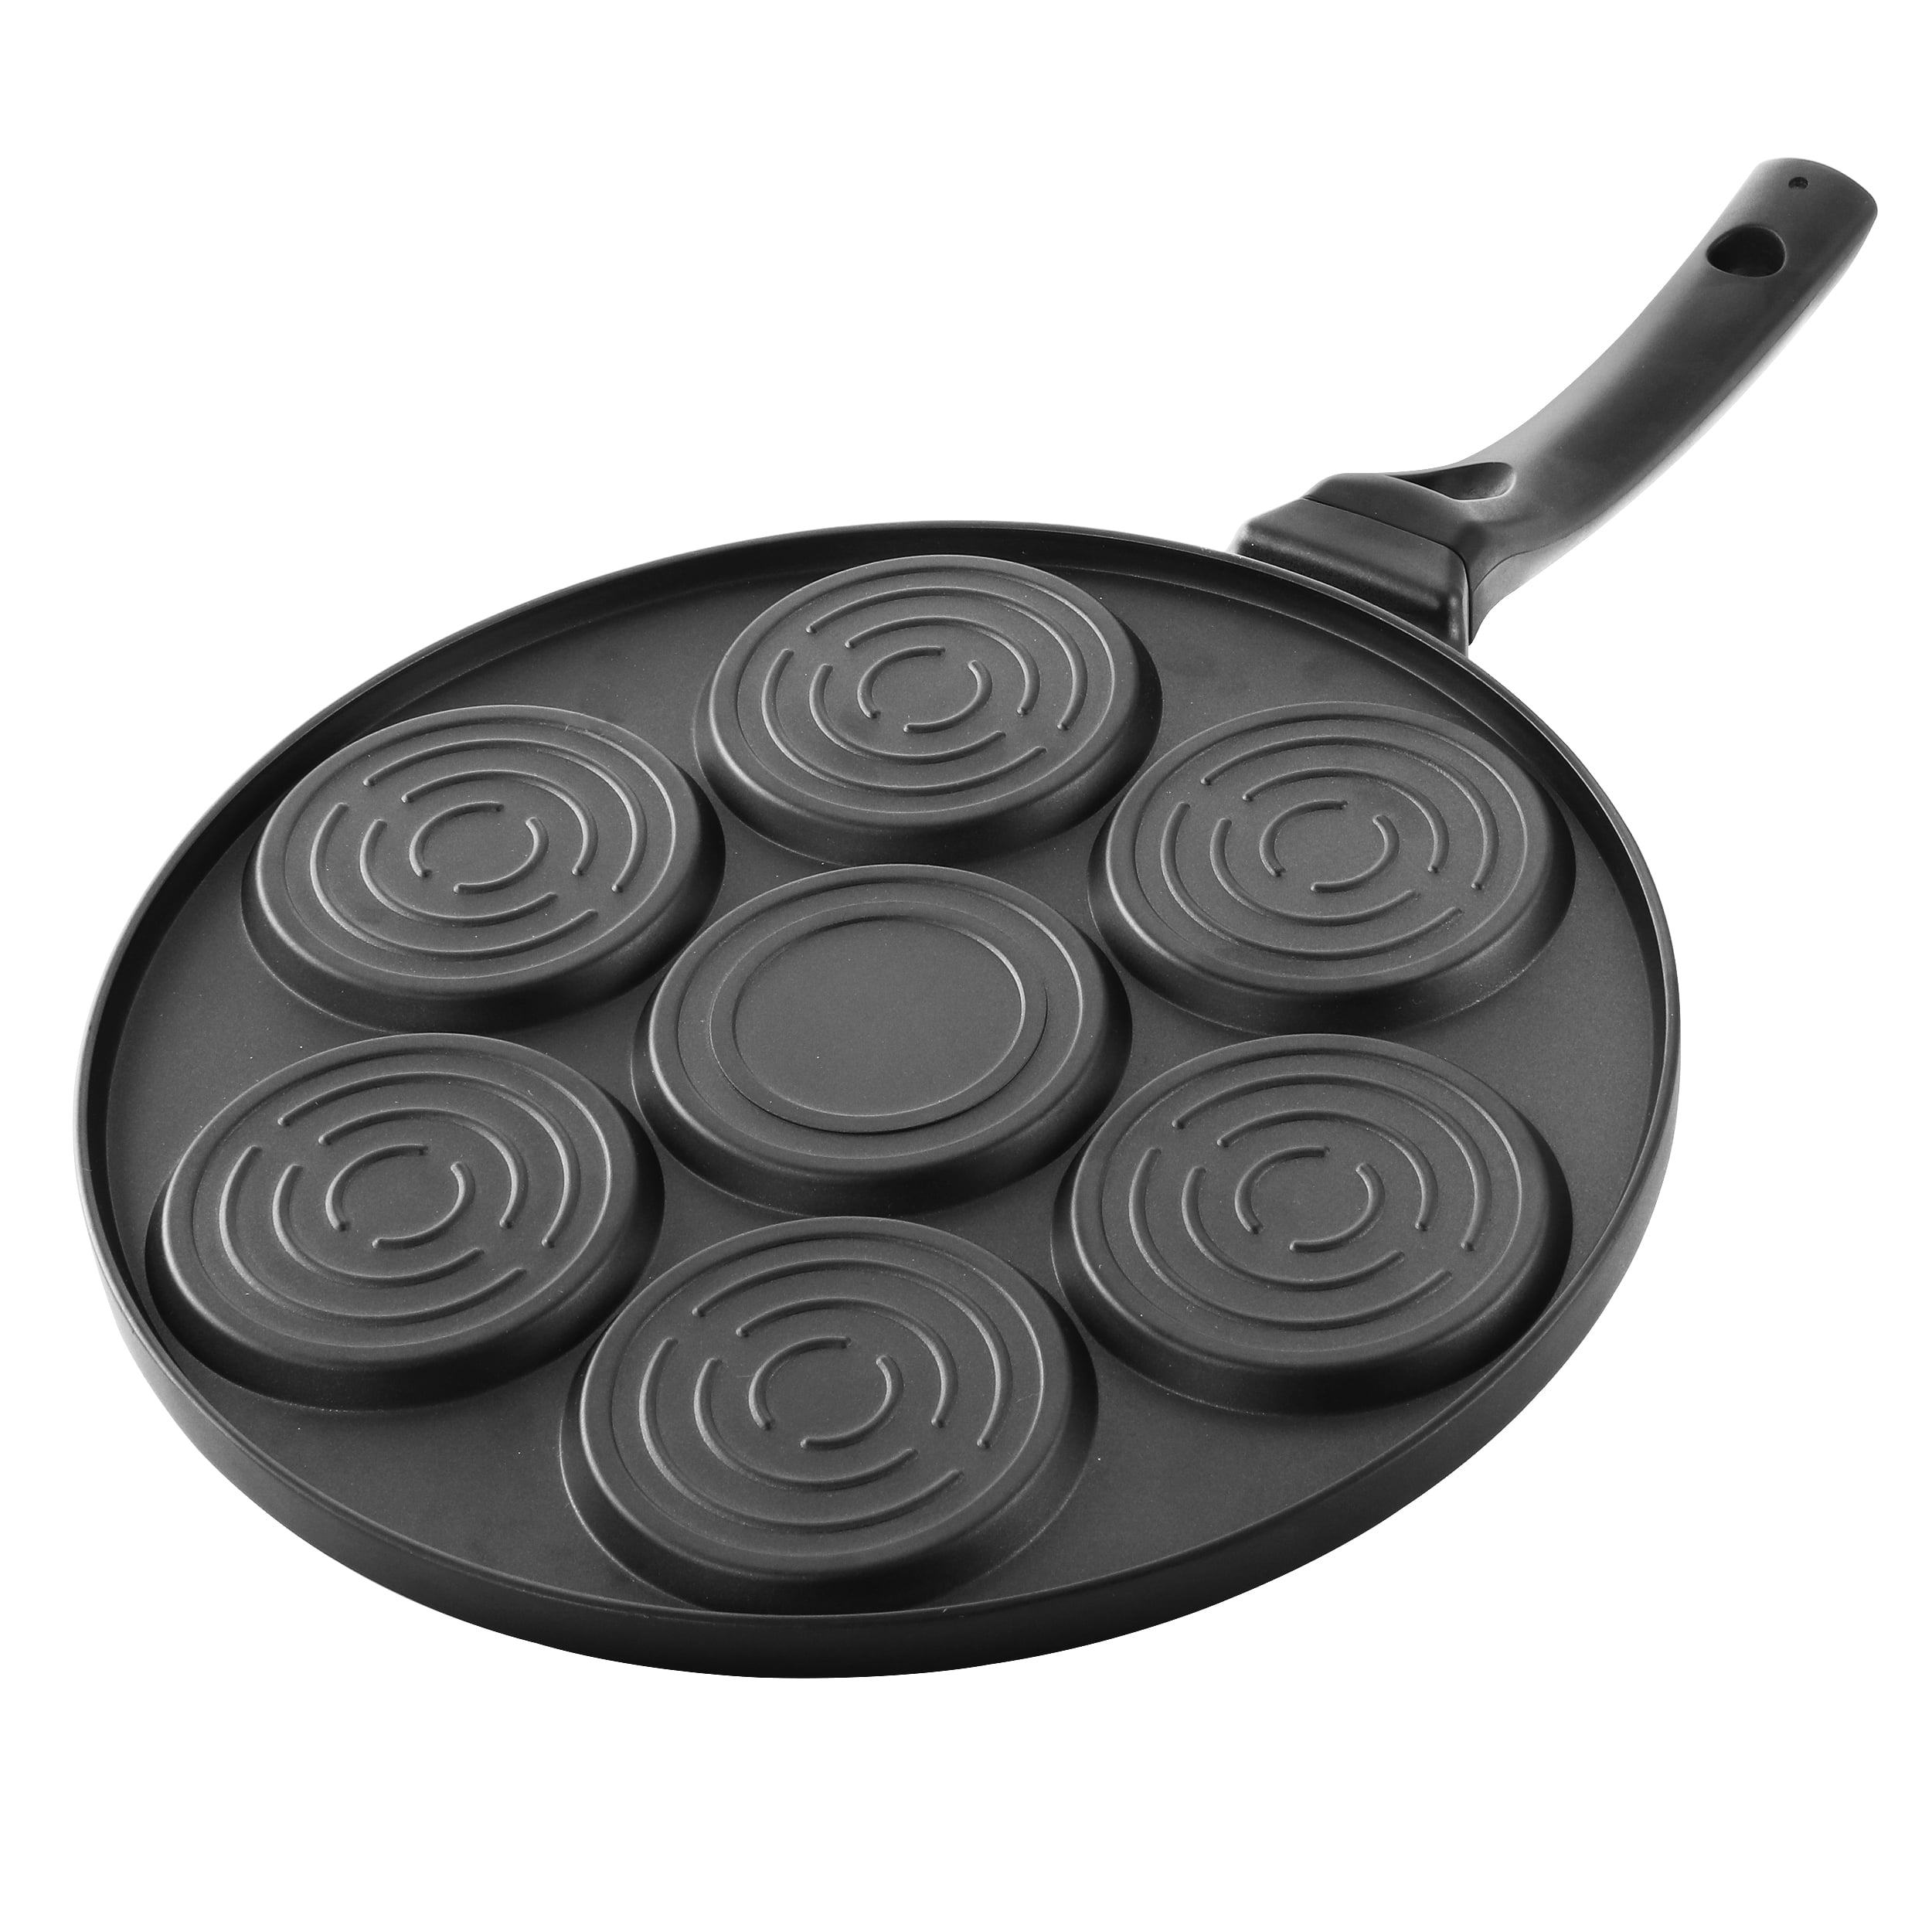 CAINFY Pancake Pan Maker Nonstick Induction Compatible, 10.5 Inch